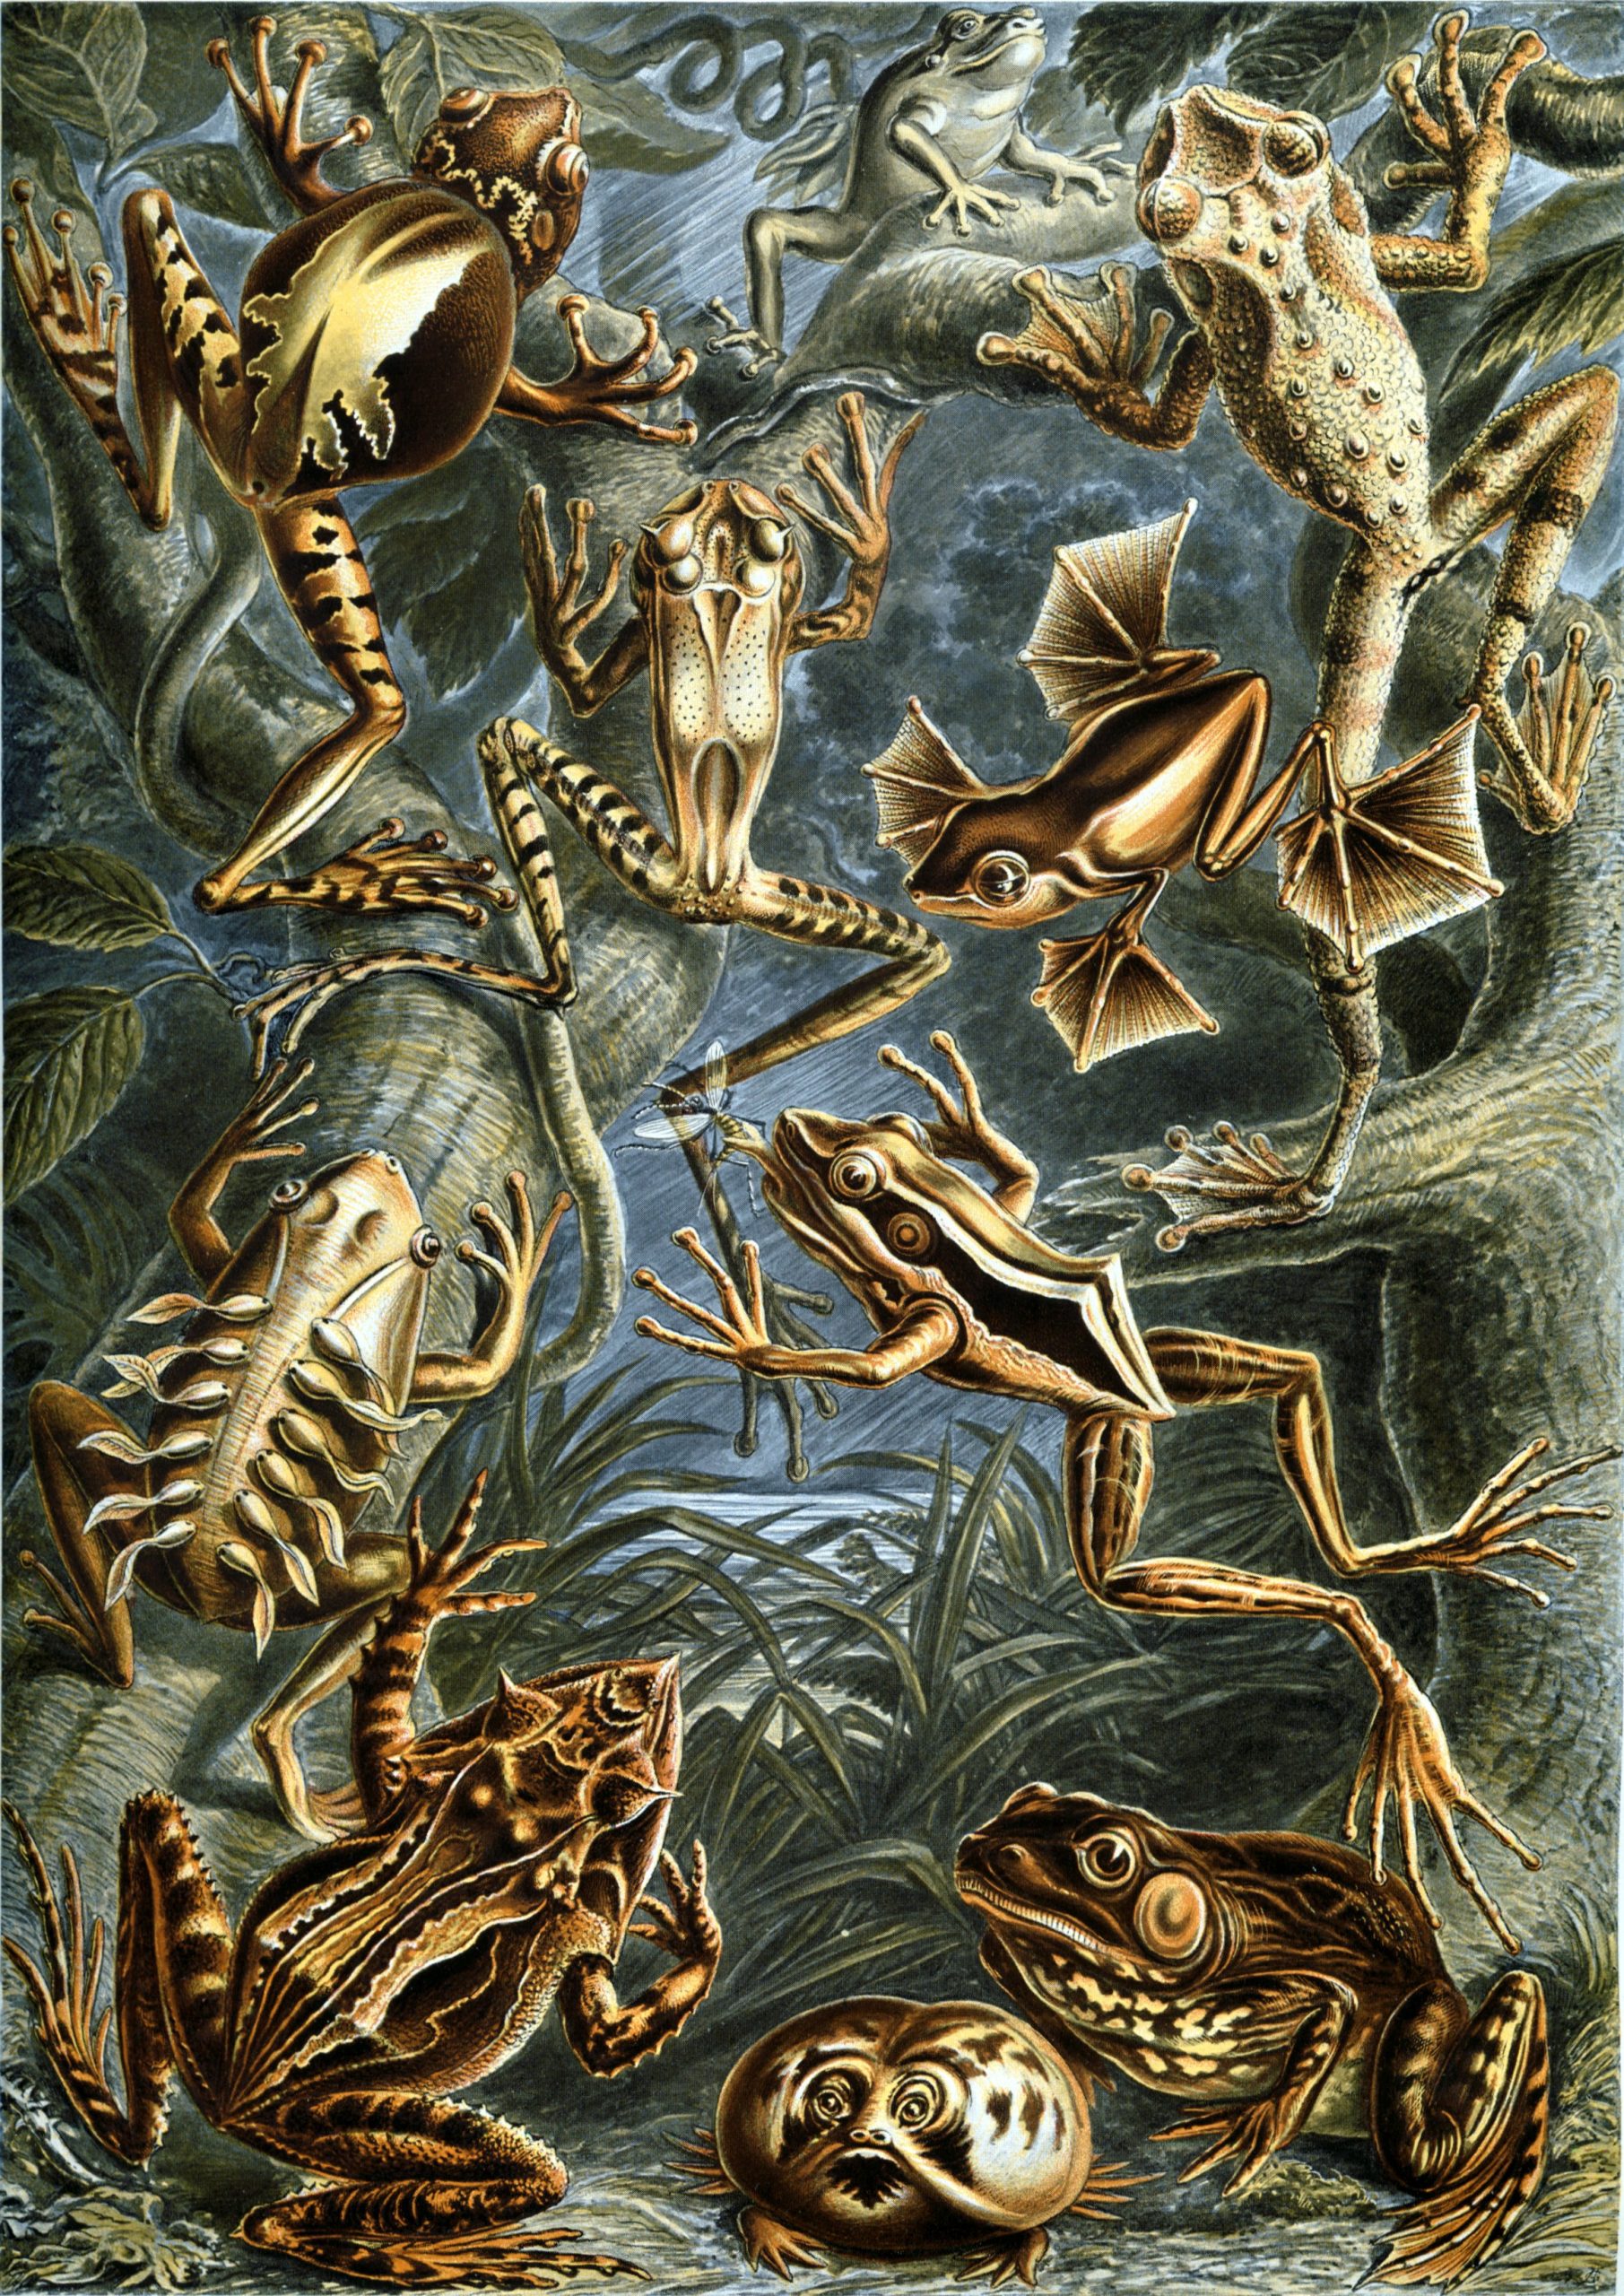 A detailed illustration of various frogs and toads in a tropical rainforest